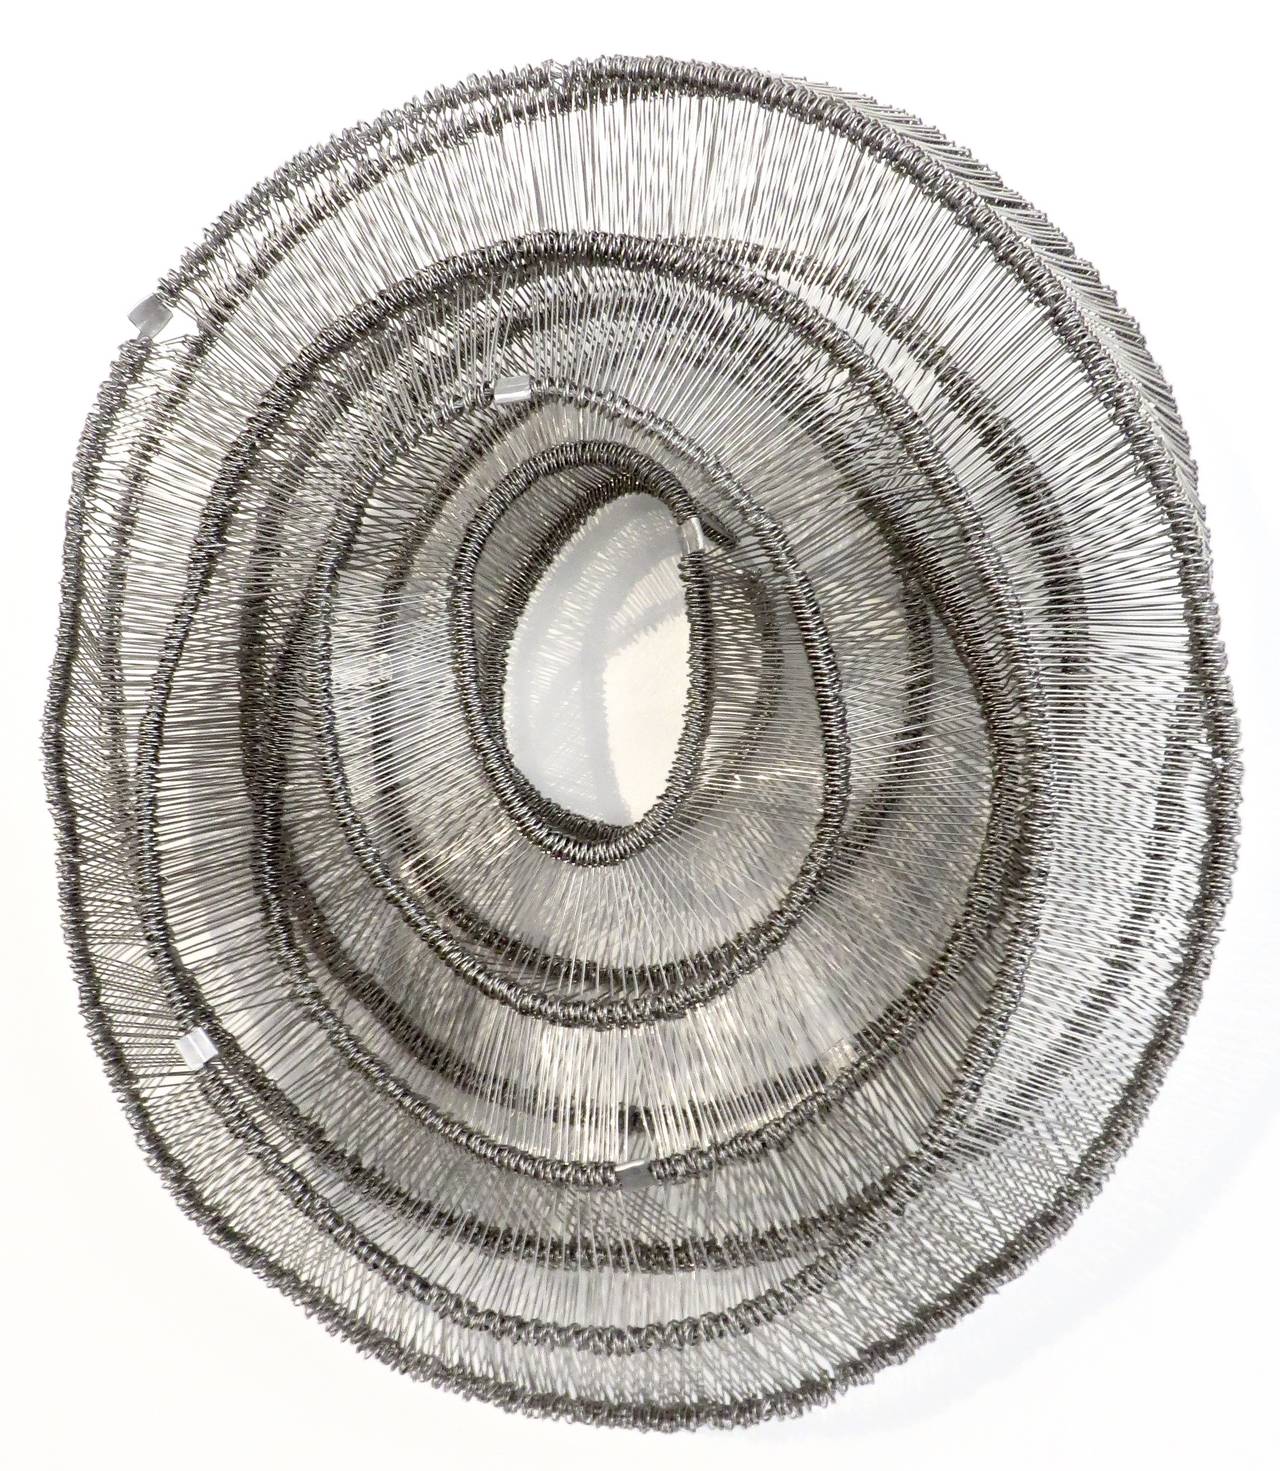 Eric Gushee Emergence Series No. 1 Stainless Steel Woven Metal Sculpture, 2015 2